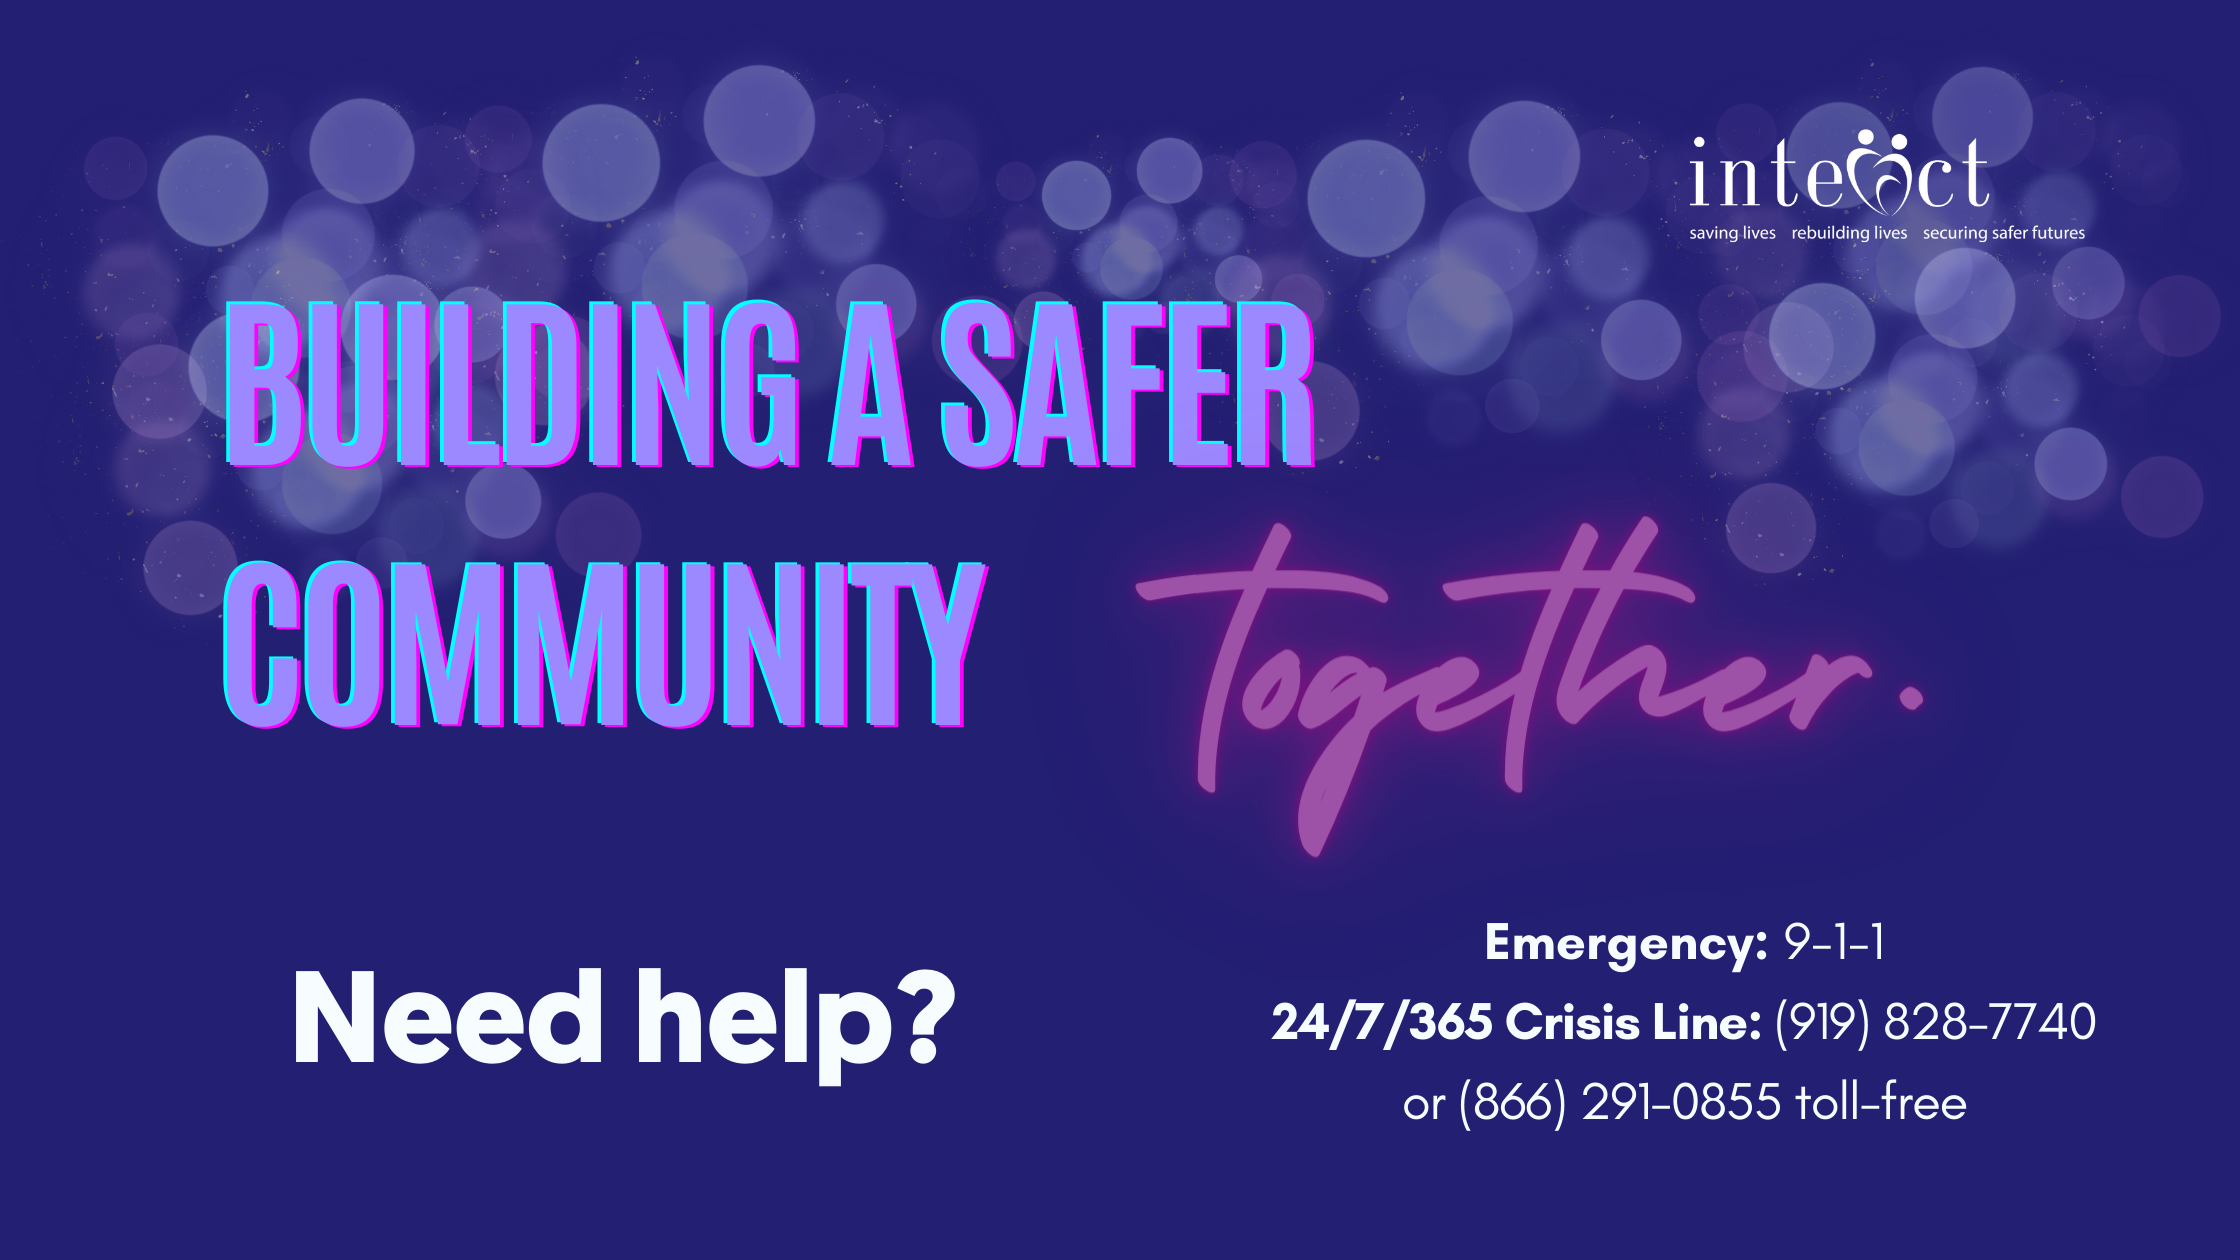 Building a safer community together. Need help? Emergency: 9-1-1<br />
24/7/365 Crisis Line: (919) 828-7740 or (866) 291-0855 toll-free